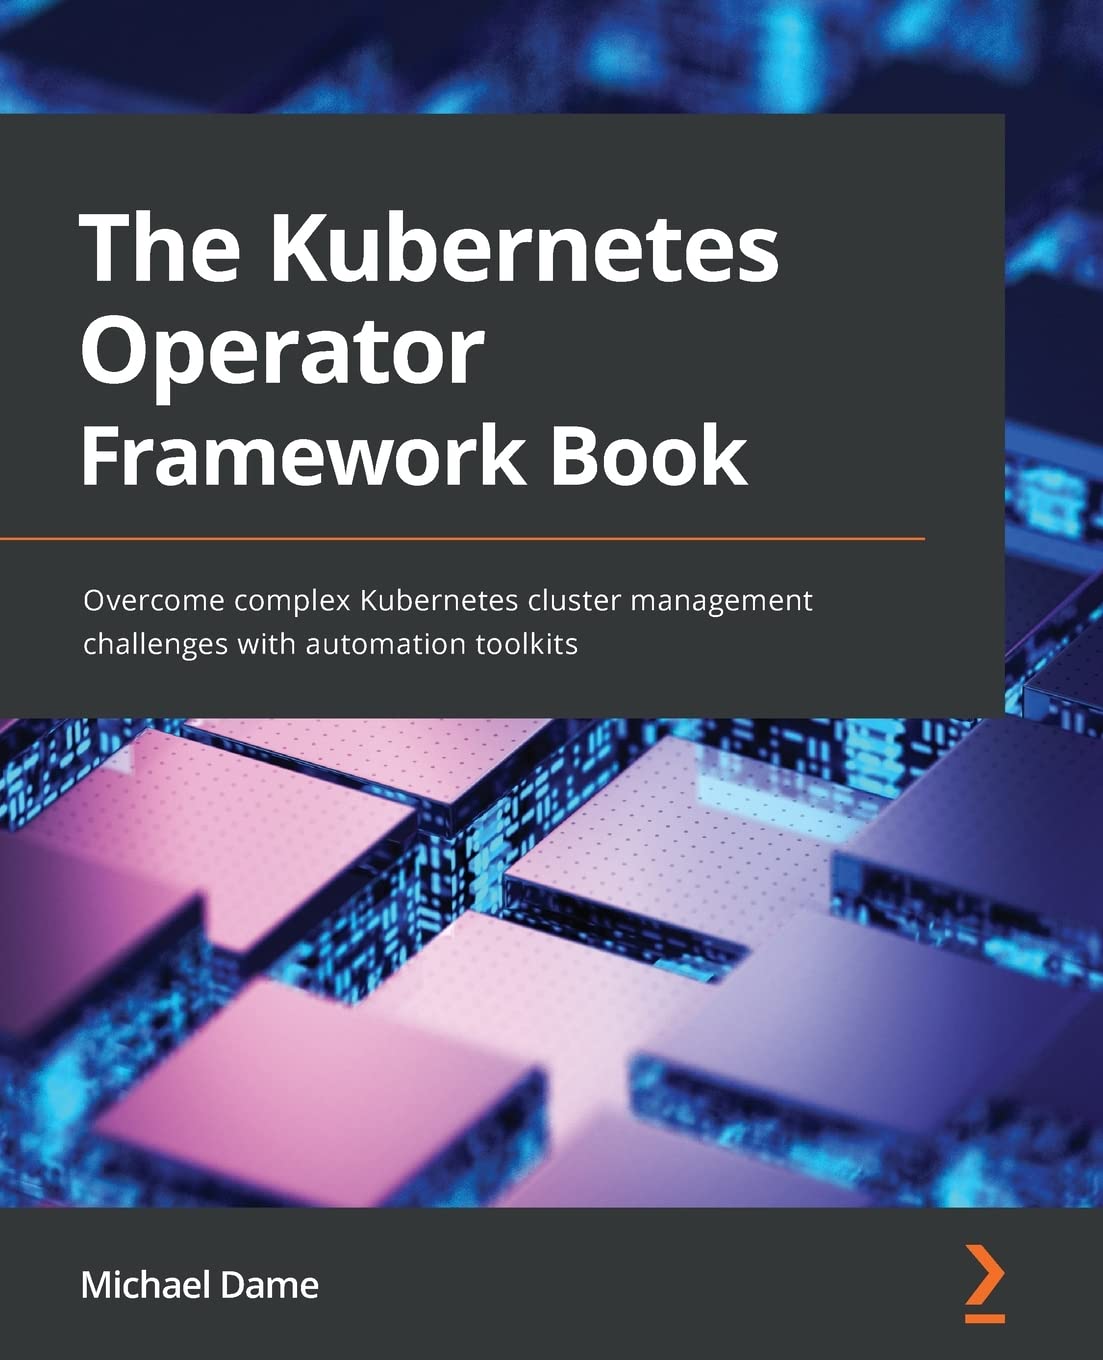 The Kubernetes Operator Framework Book: Overcome complex Kubernetes cluster management challenges with automation toolkits by  Michael Dame